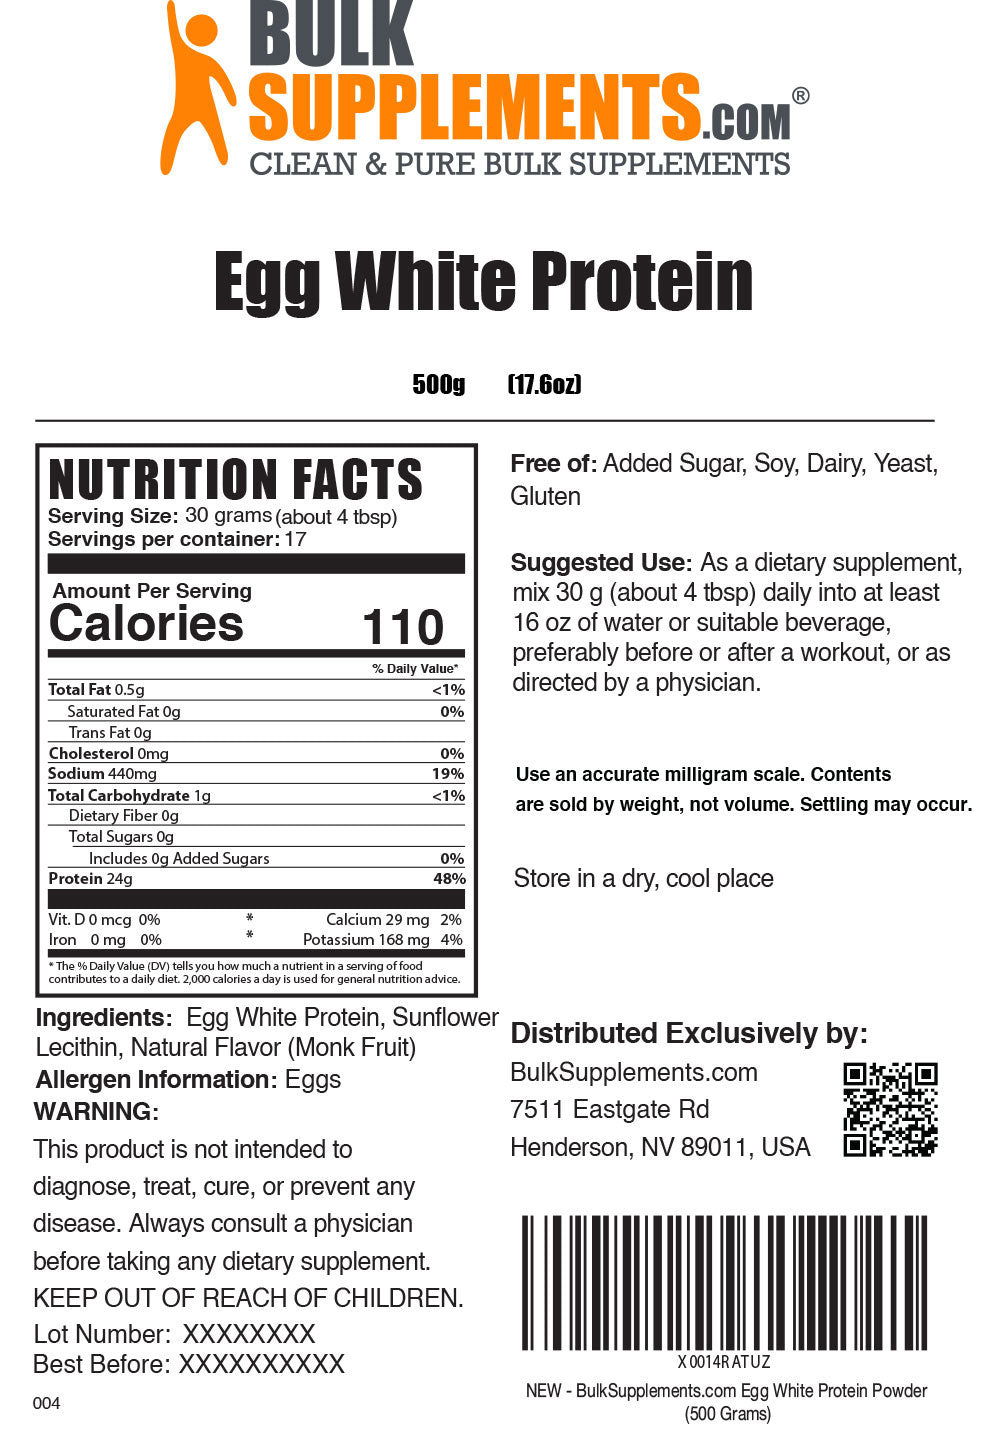 Egg White Protein 500g Nutrition Facts